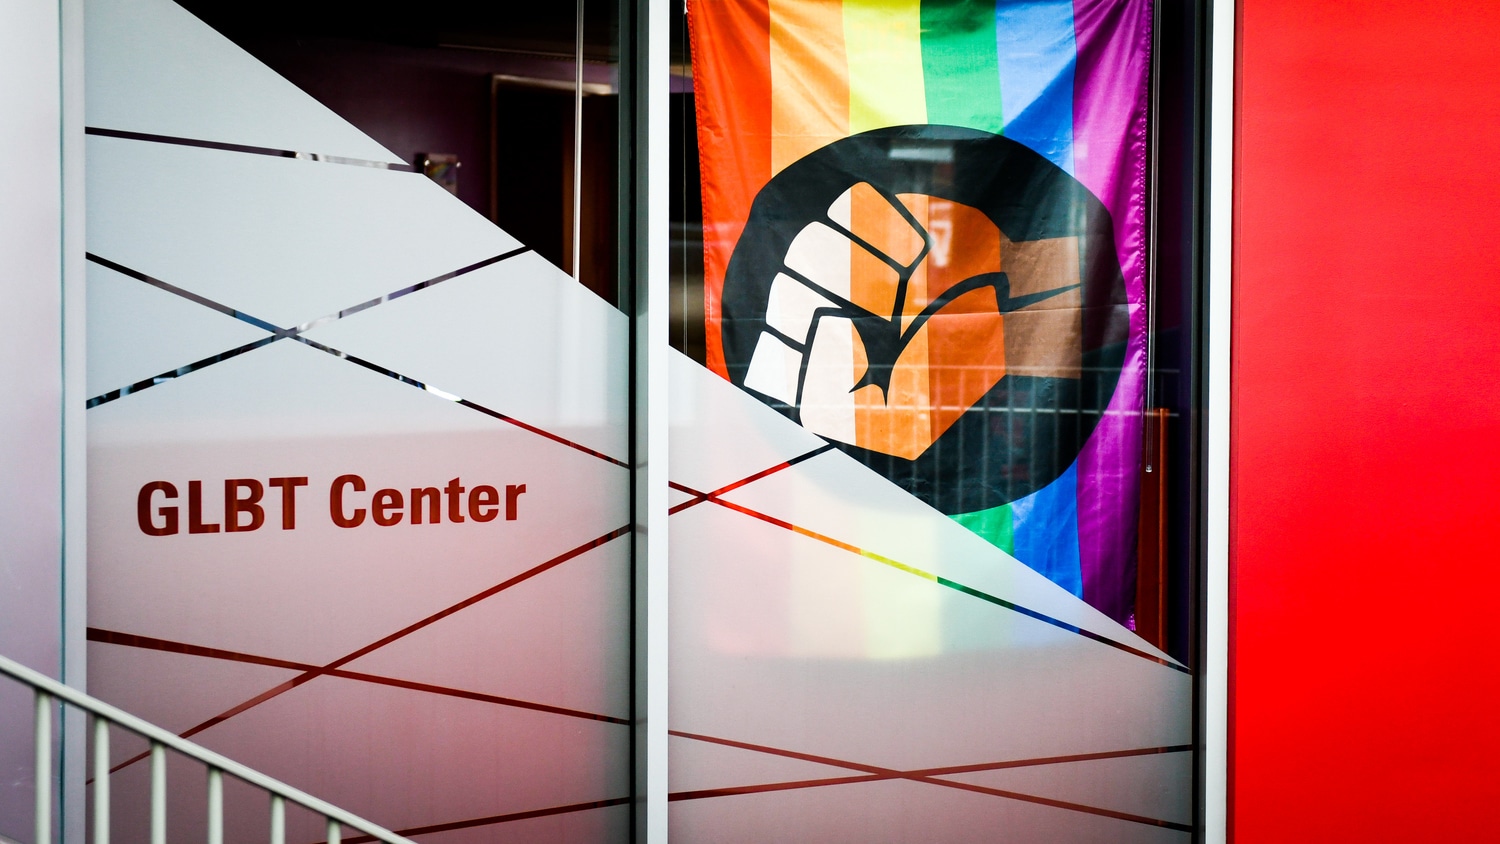 the entrance to the GLBT center adorned with a rainbow flag